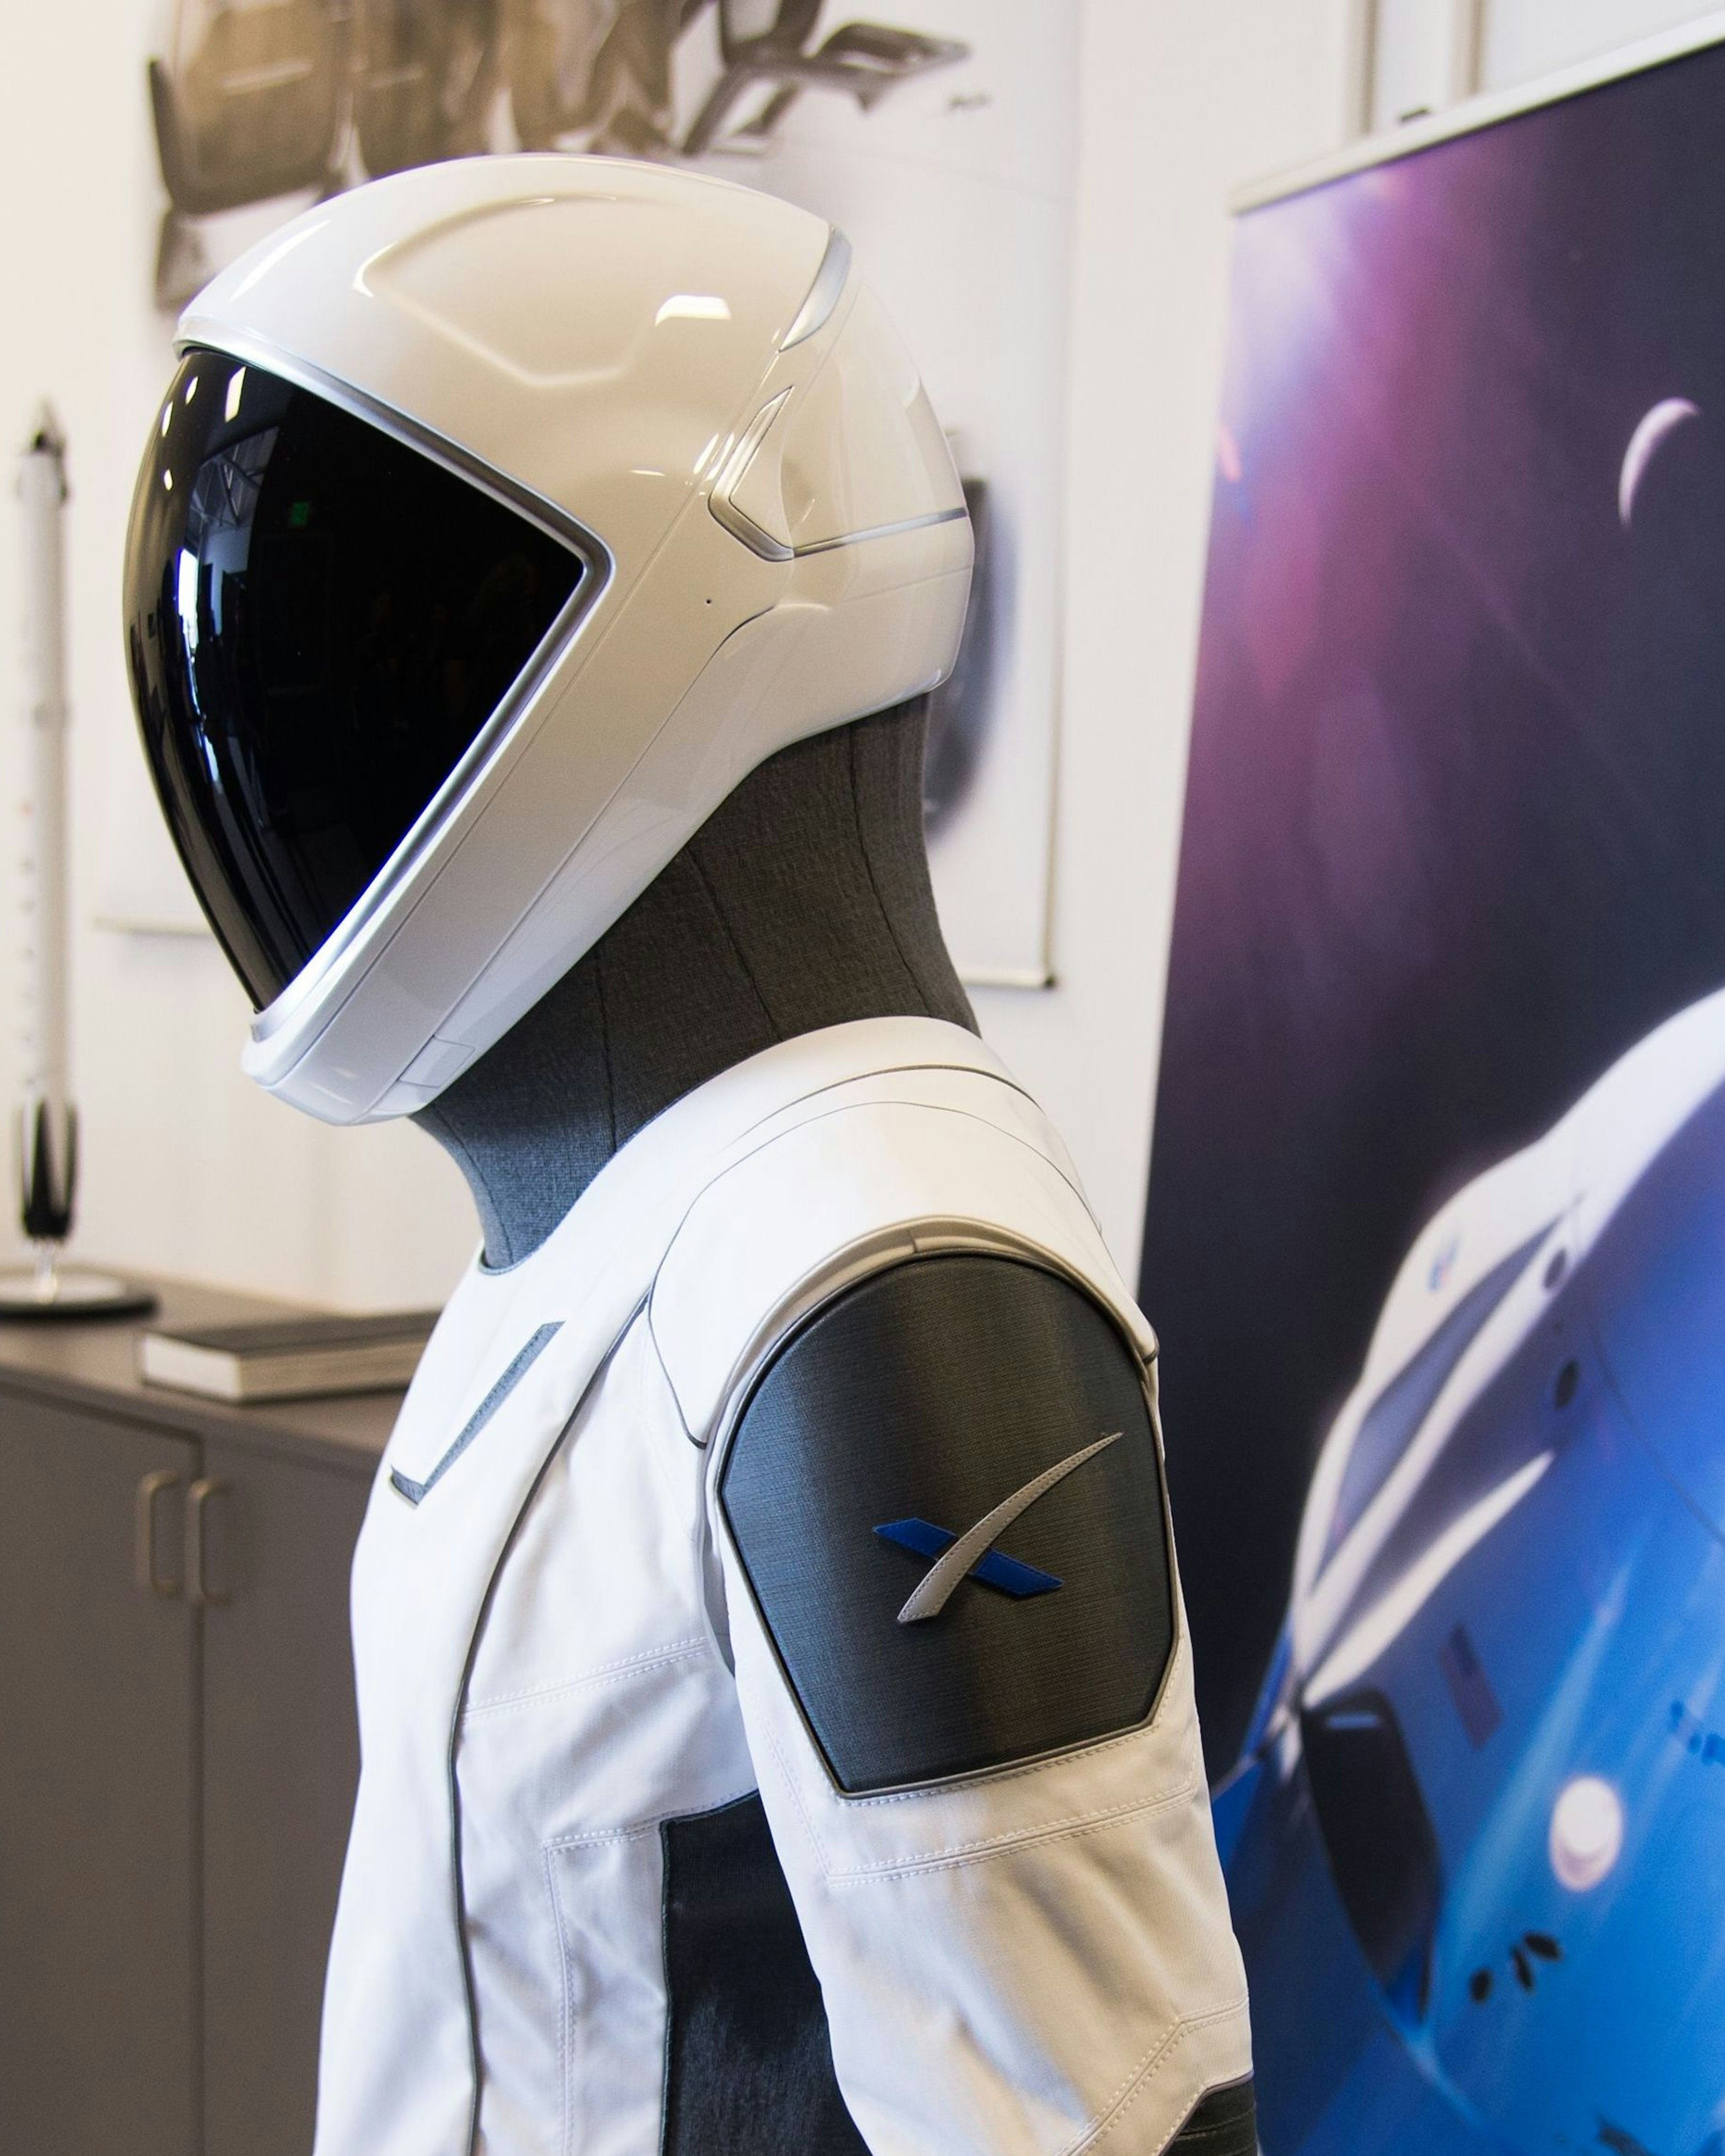 The SpaceX spacesuit to be wore by NASA astronauts that will travel to the International Space Station aboard the SpaceX Crew Dragon capsule is displayed during a media tour at SpaceX headquarters in Hawthorne, California, on August 13, 2018. - According to the Teslarati website the majority of the helmet is 3D printed and SpaceX has used that capability to directly integrate valves, a number of complex mechanisms for visor retraction and locking, microphones, and even air cooling channels into the helmets structure. The suit itself is designed so that necessary external connections (power, water, air, etc) all pass through one single umbilical panel located in the middle of the suit√ïs right thigh. The suit is designed to allow astronauts to work in extreme conditions including hard vacuum but not space walks. (Photo by Robyn Beck / AFP)